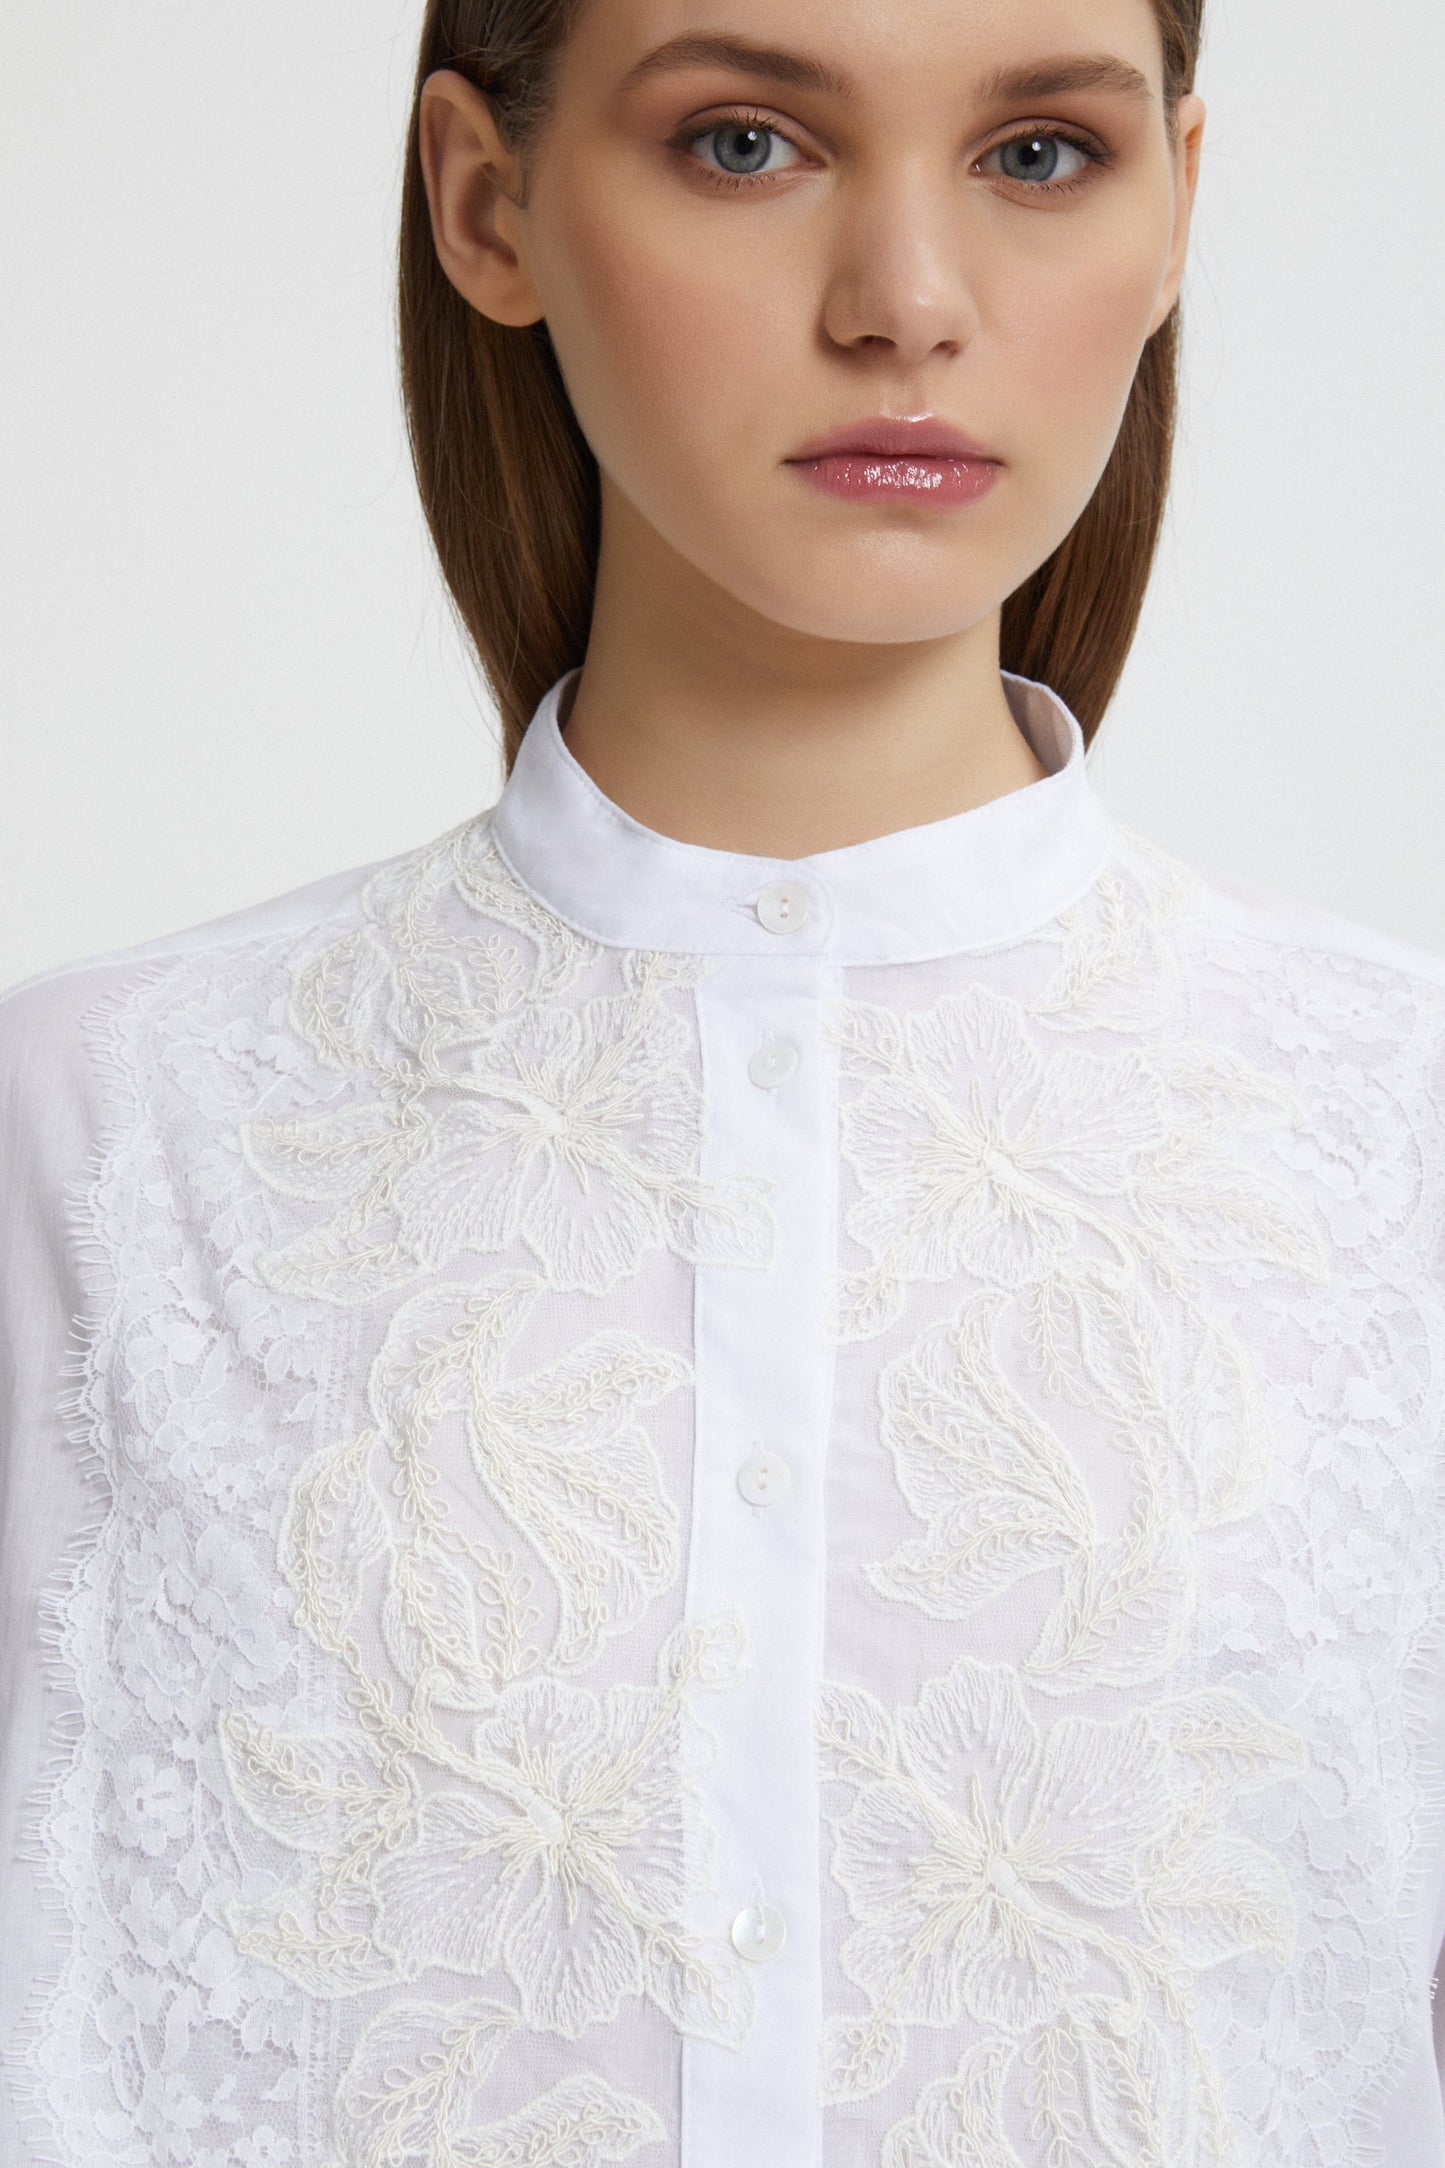 EMBROIDERED KOREAN SHIRT WITH LACE INSERT